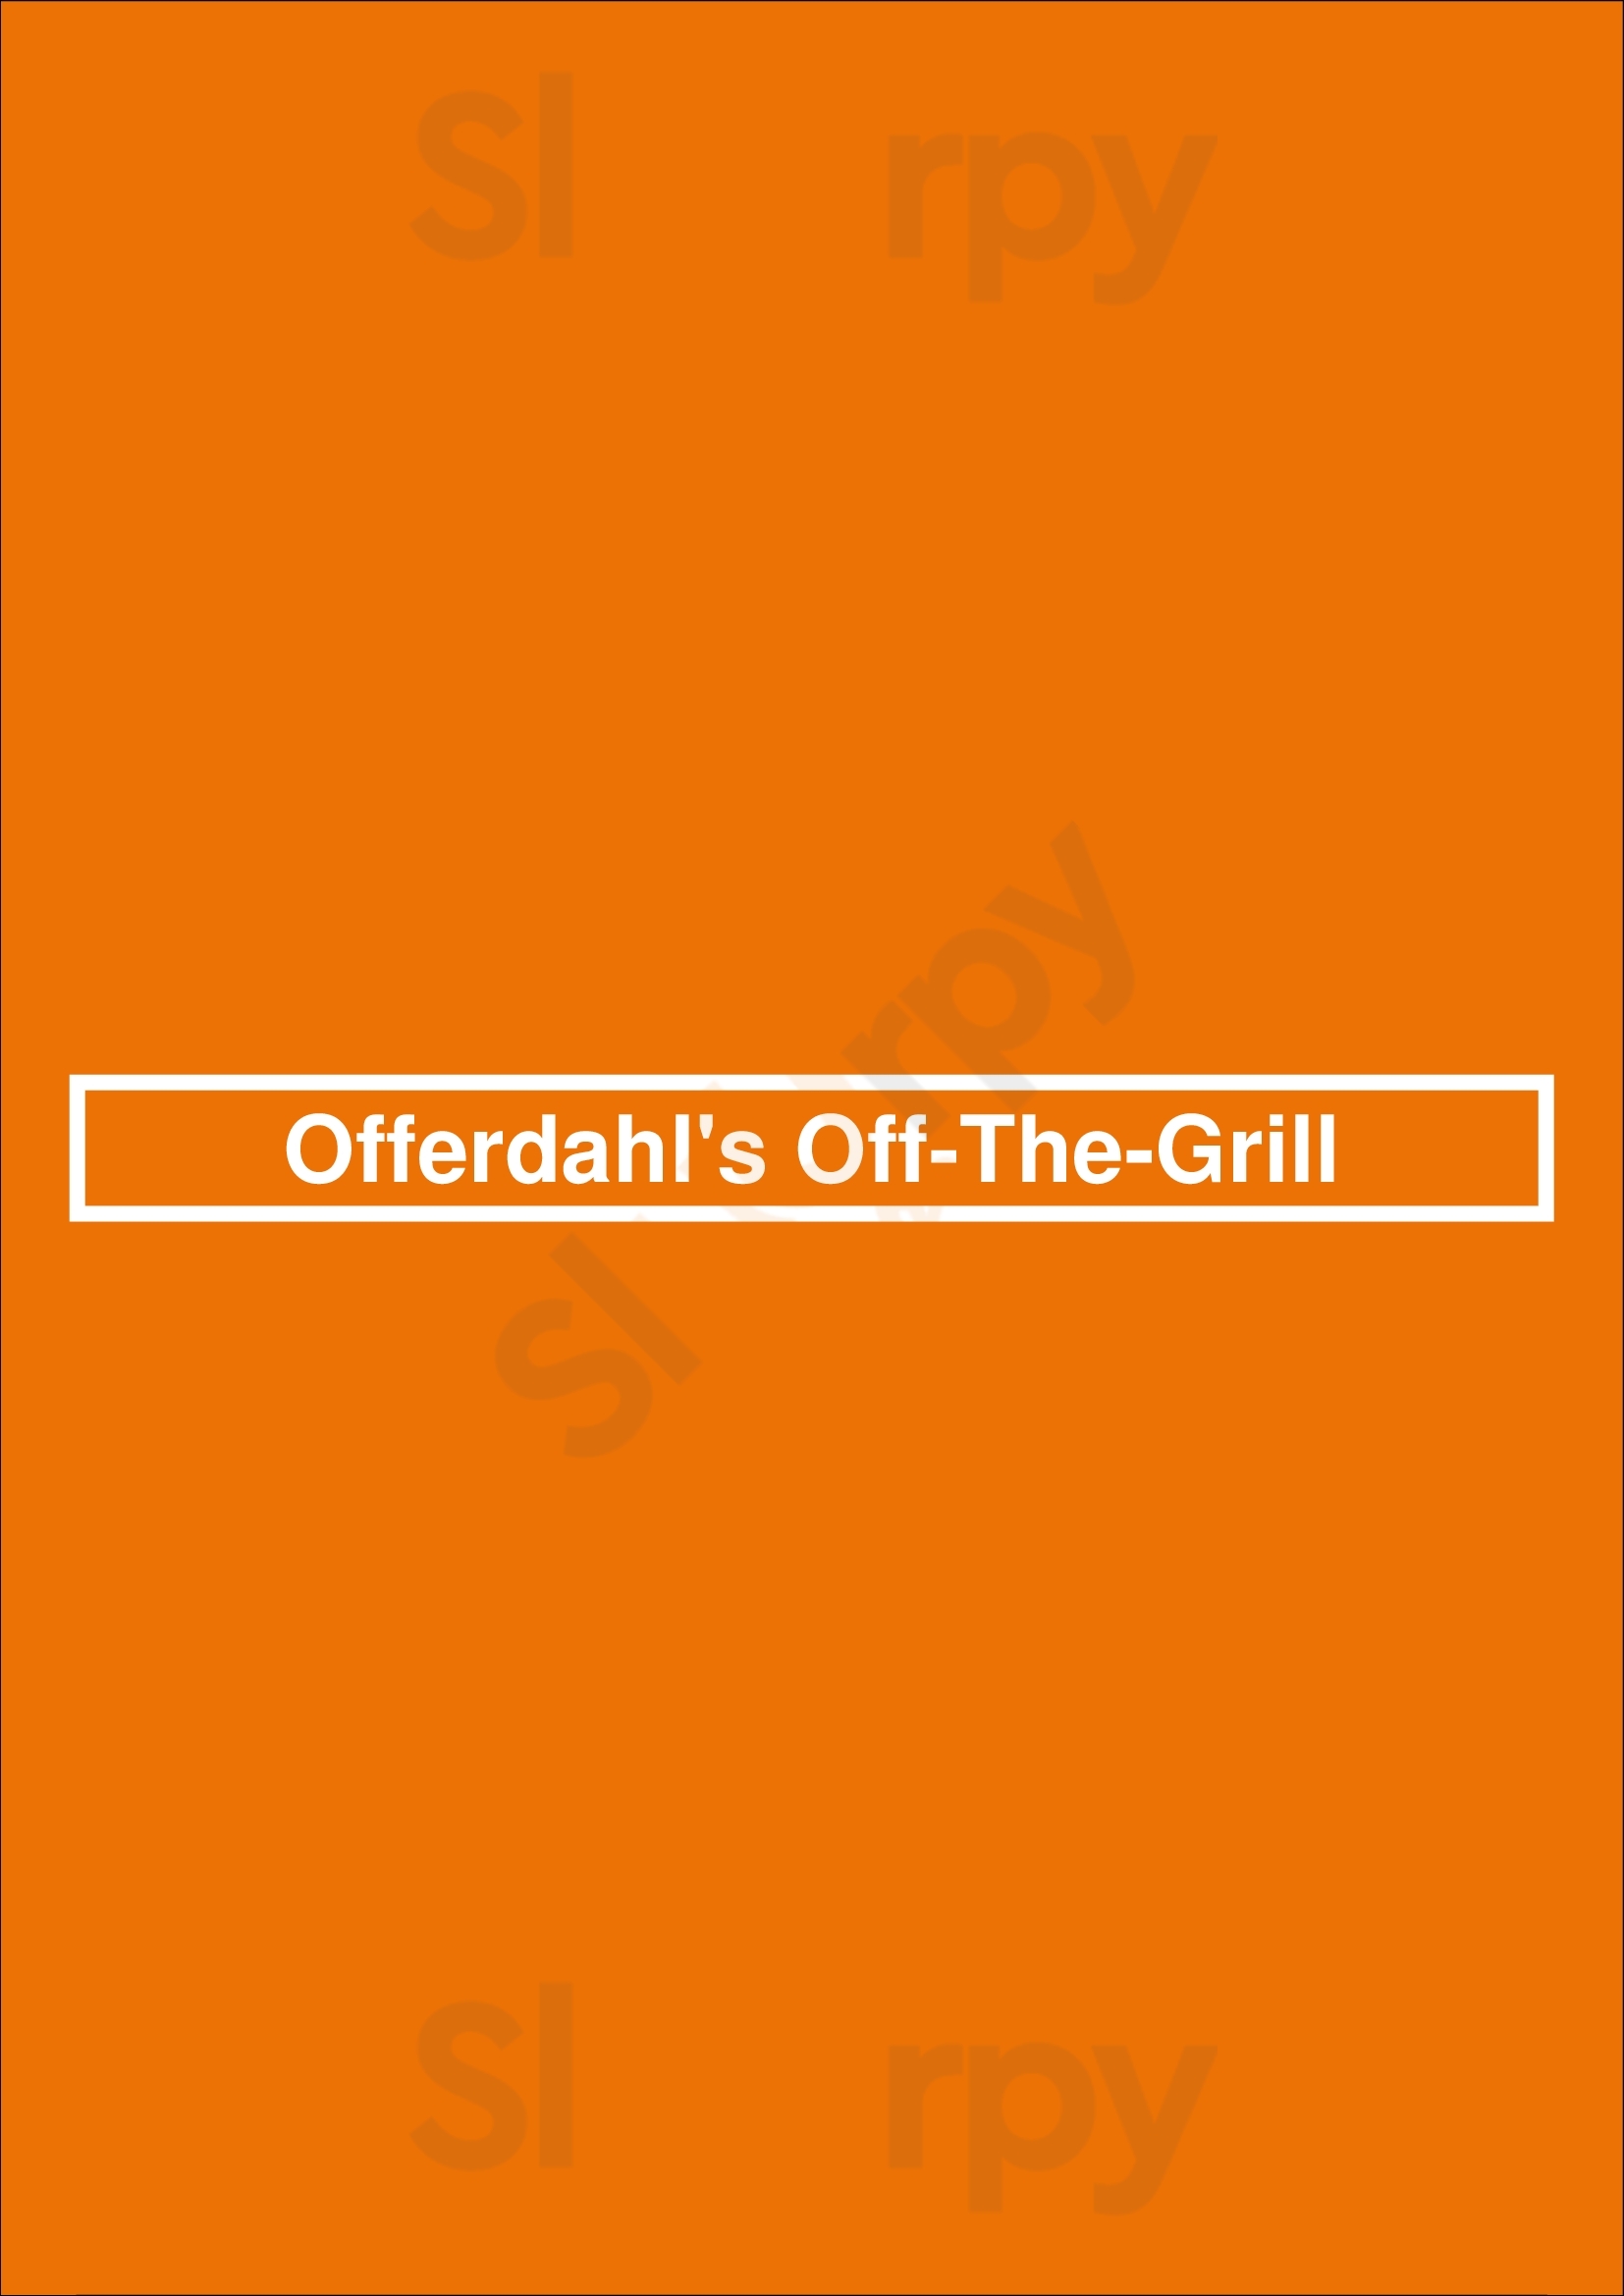 Offerdahl's Off-the-grill Fort Lauderdale Menu - 1